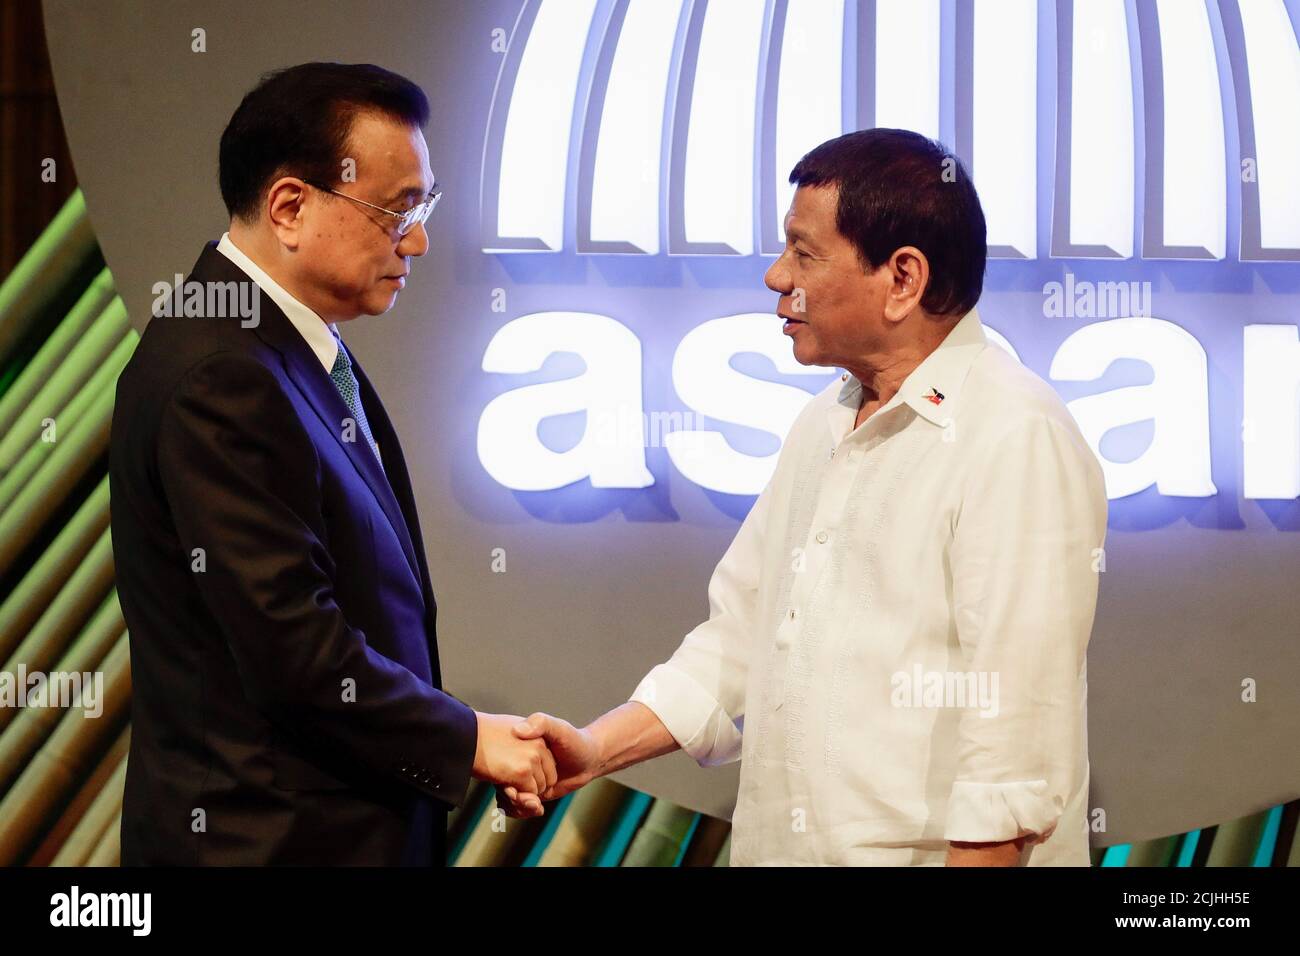 Chinese Premier Li Keqiang (L) shakes hands with Philippine President Rodrigo Duterte (R) before the opening ceremony of the 31st Association of Southeast Asian Nations (ASEAN) Summit in Manila, Philippines November 13, 2017. The Philippines is hosting the 31st Association of Southeast Asian Nations (ASEAN) Summit and Related Meetings from 10 to 14 November. REUTERS/Mark Cristino/Pool Stock Photo